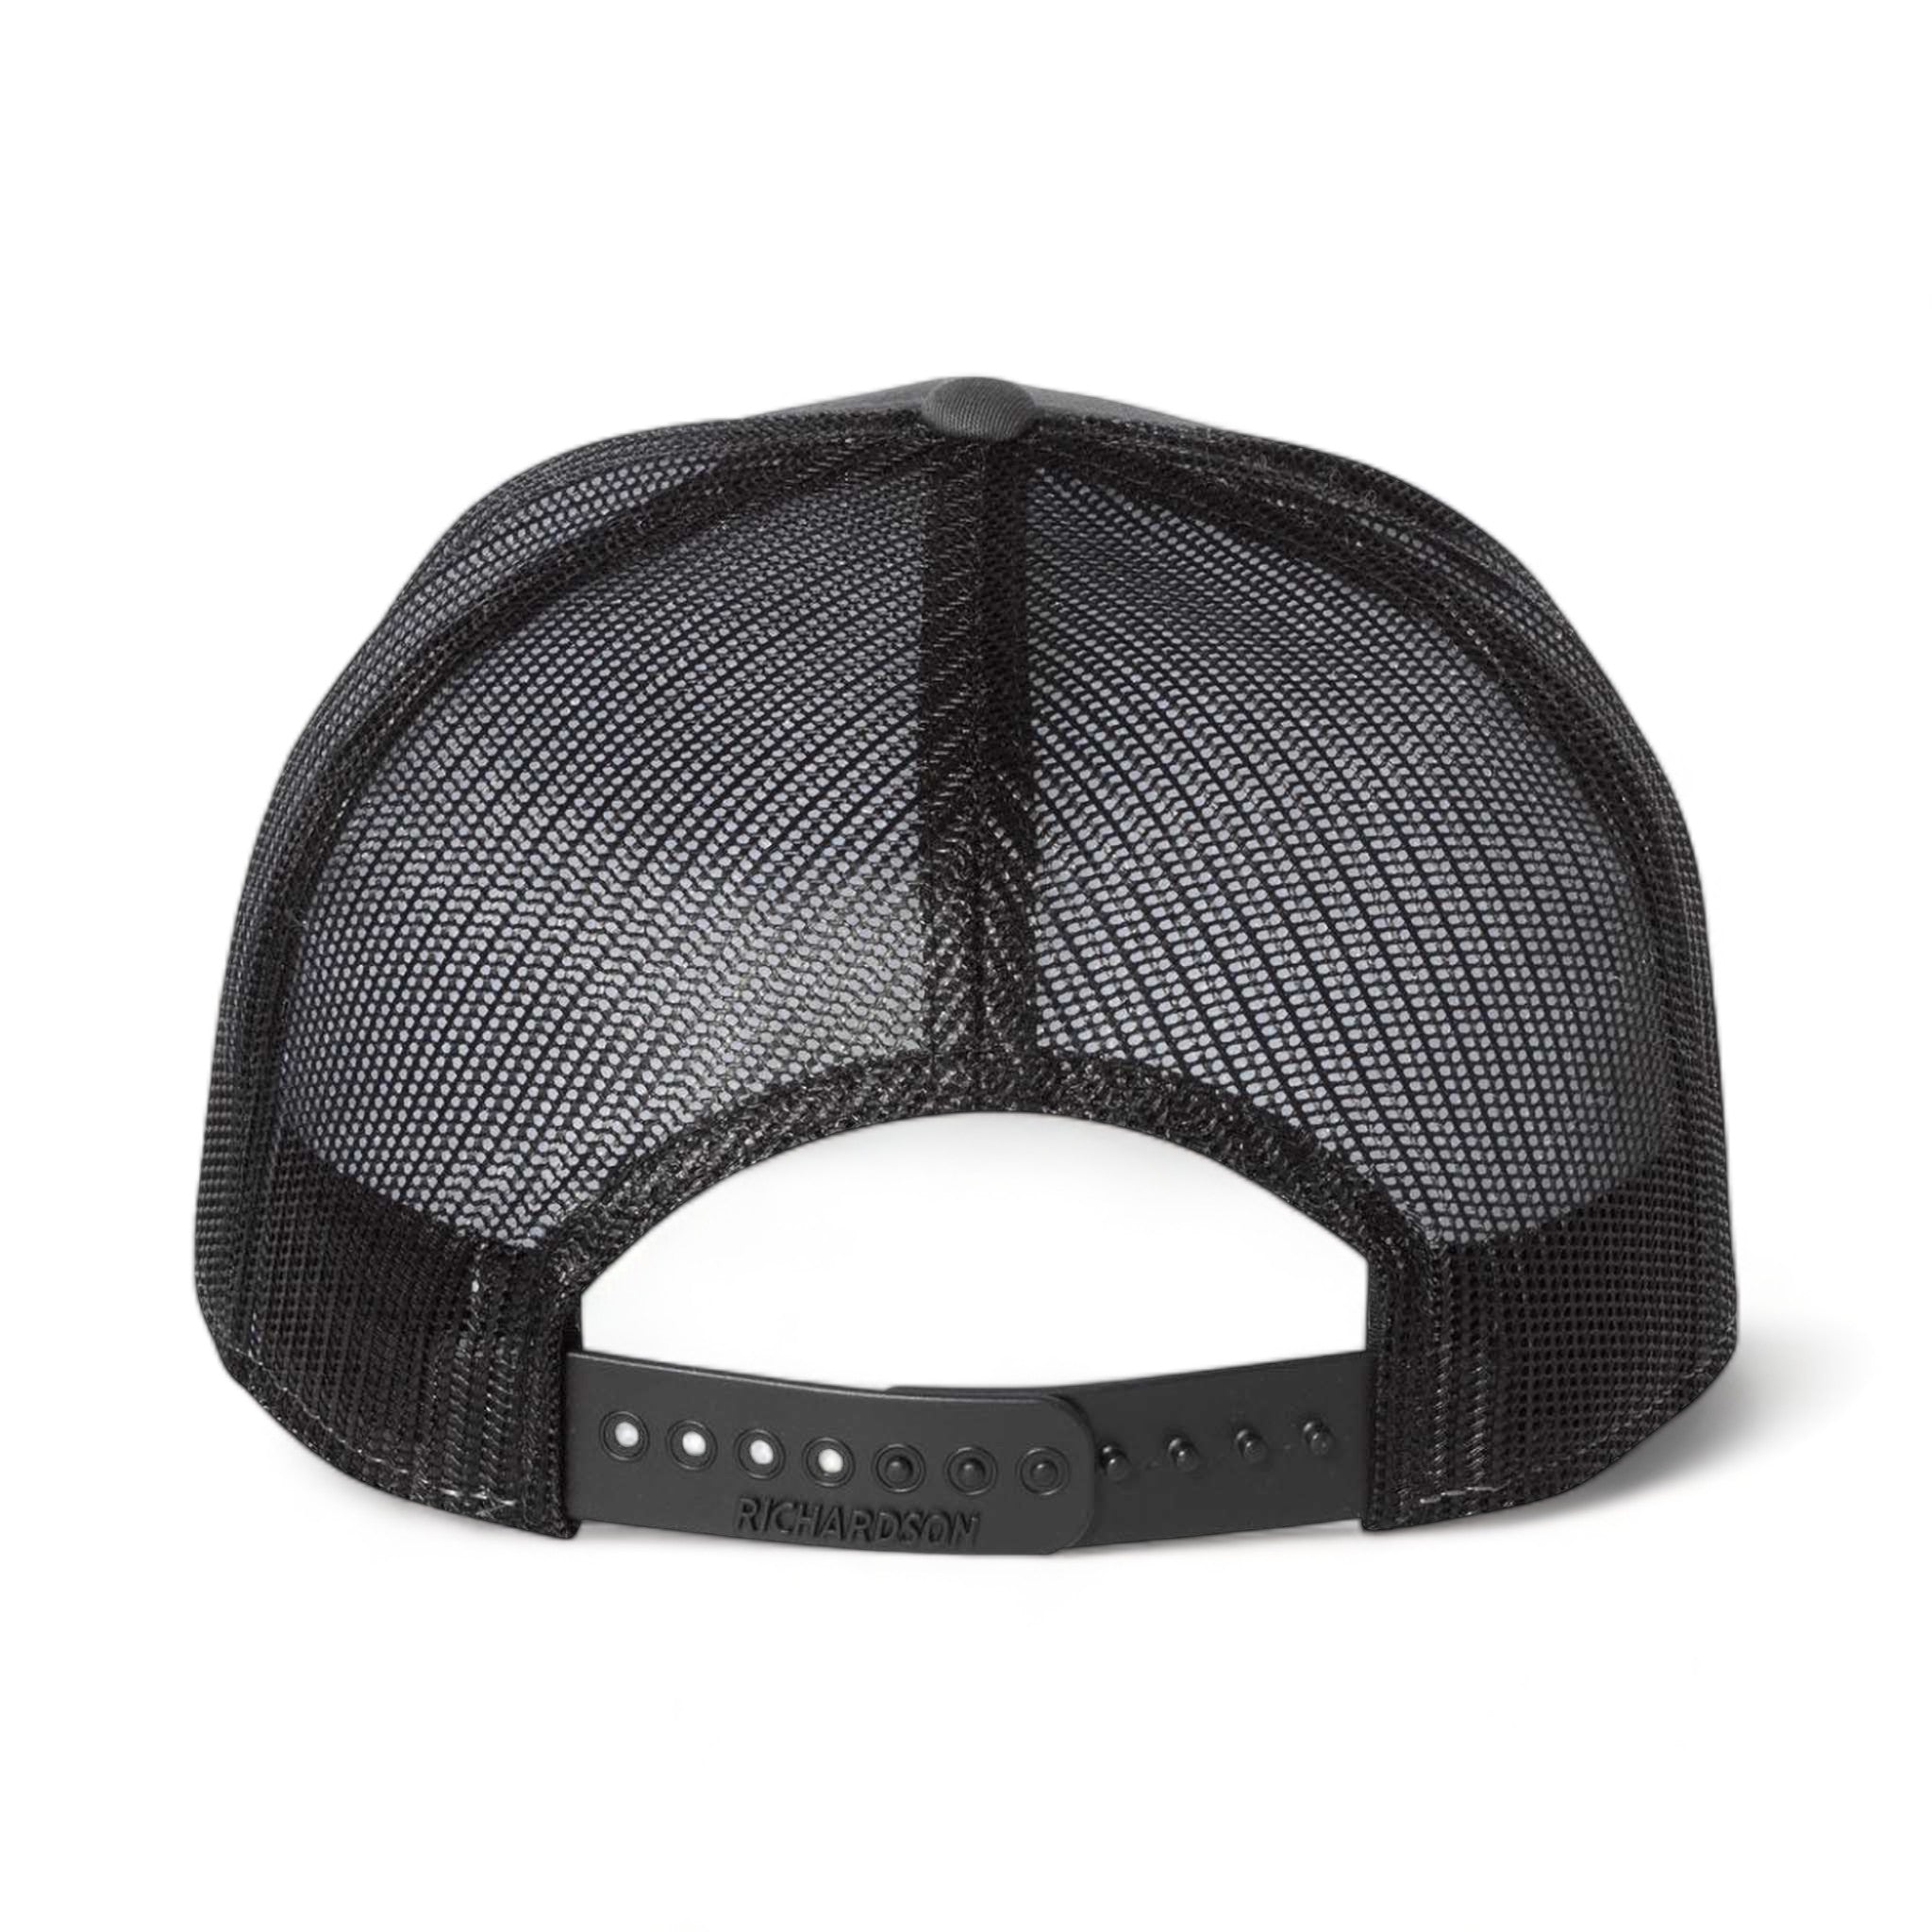 Back view of Richardson 168 custom hat in charcoal and black